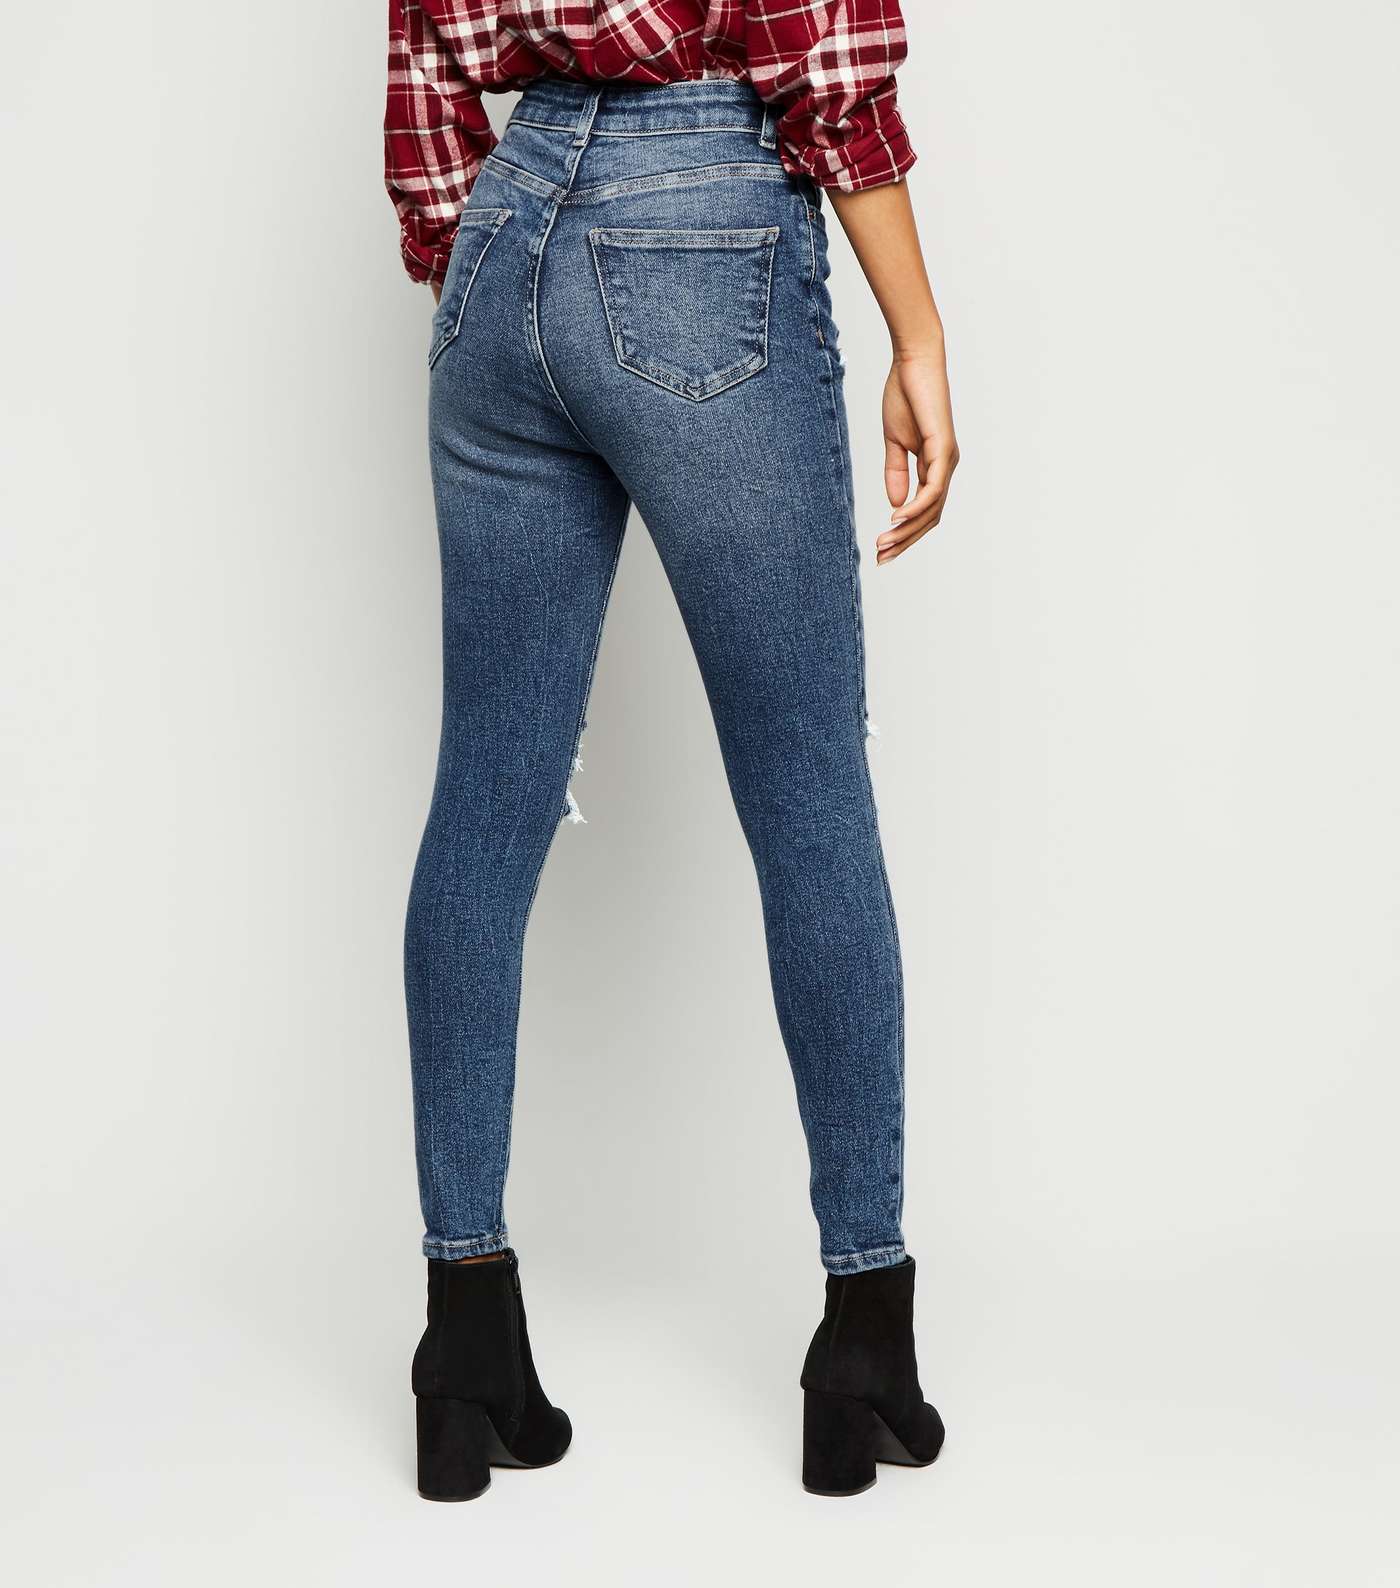 Petite Blue Ripped High Waist Super Skinny Jeans Image 3